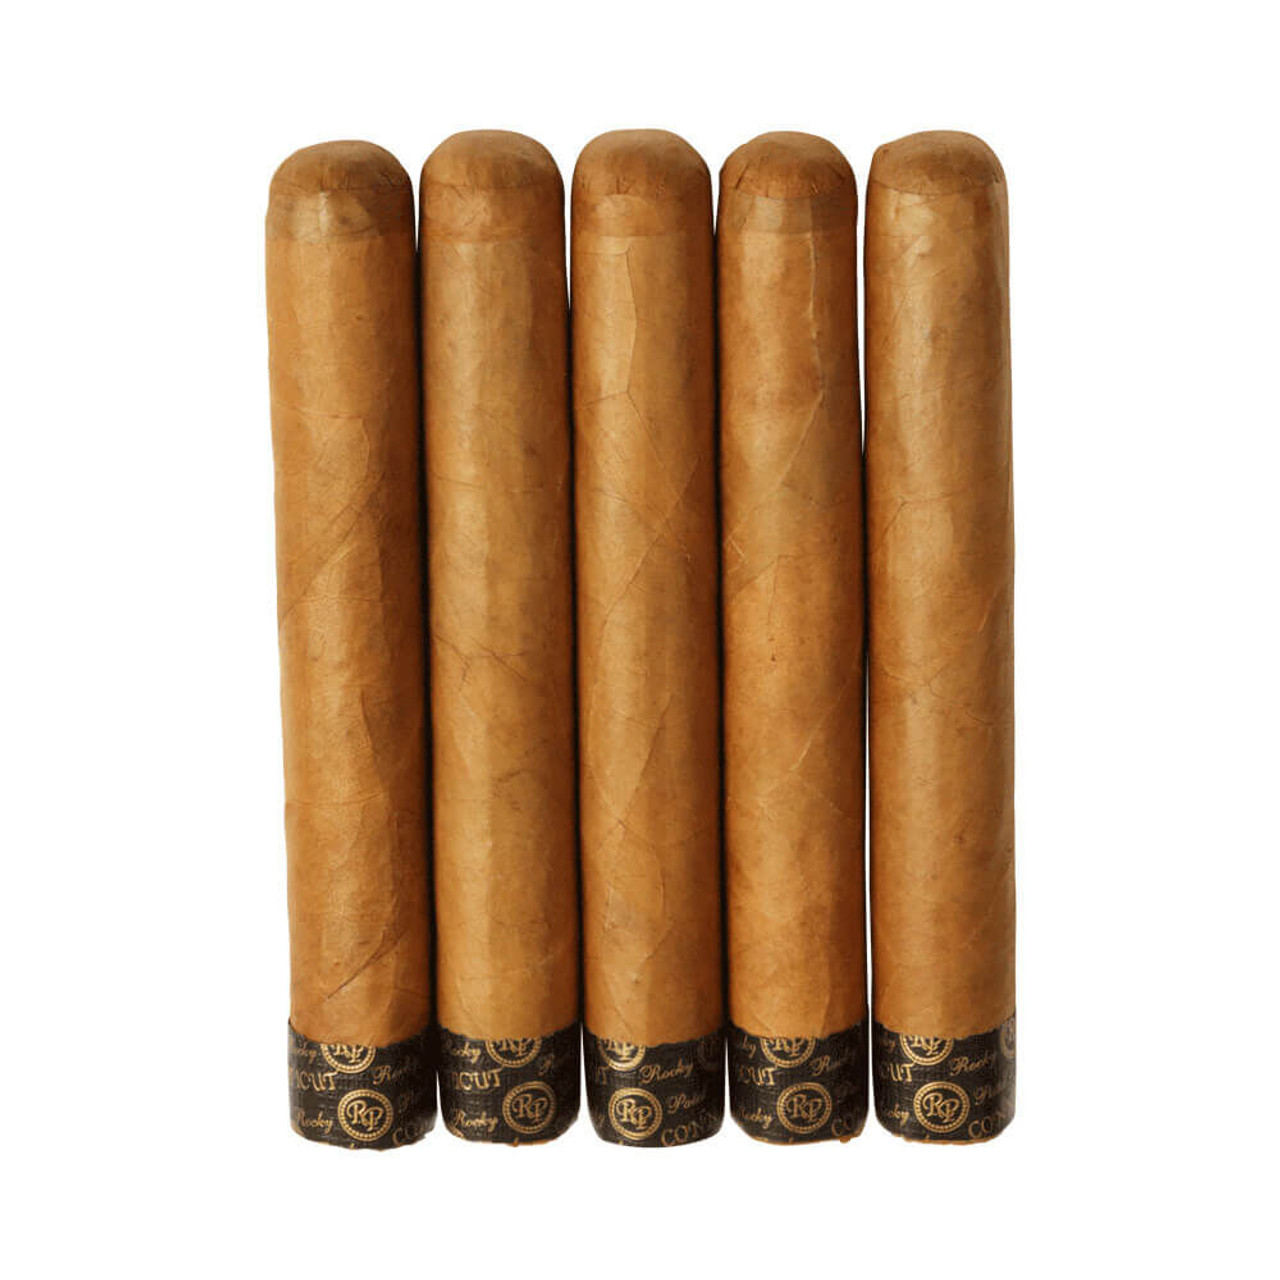 Rocky Patel The Edge Connecticut Robusto Cigars - 5.5 x 50 (Pack of 5) *Box